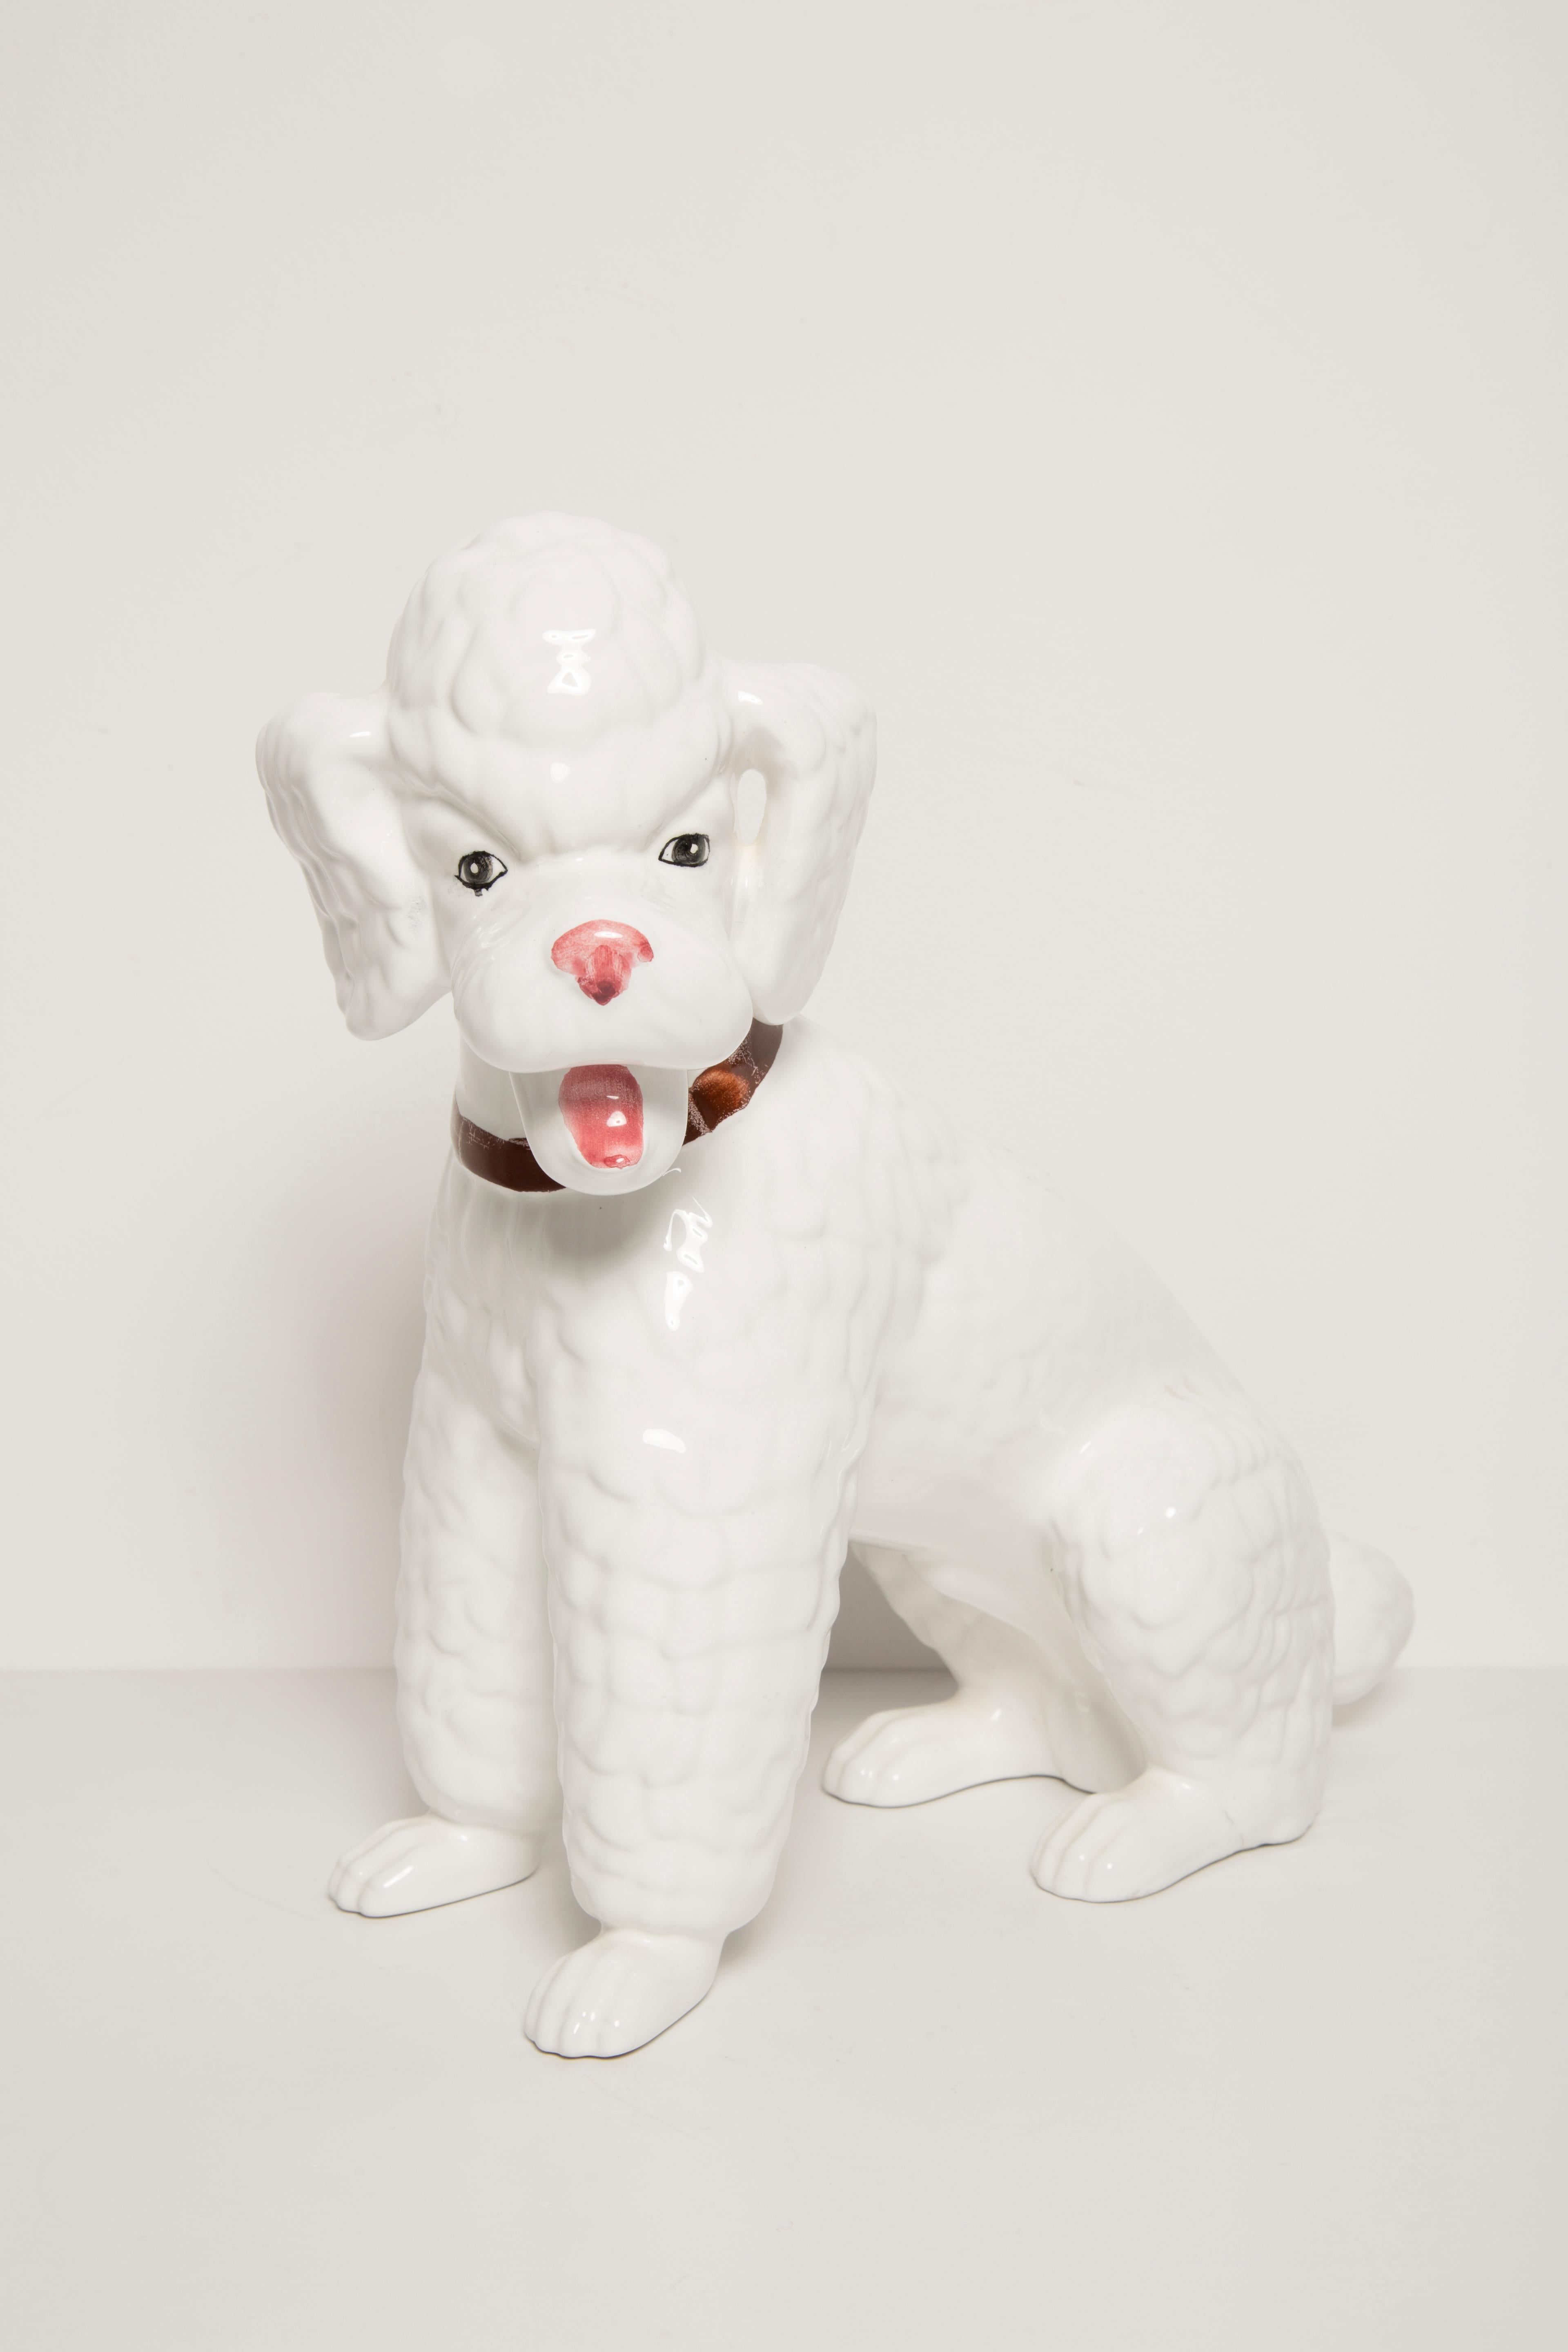 Painted ceramic, very good original vintage condition. No damages or cracks. Beautiful and unique decorative sculpture. Big King White Poodle Dog Sculpture was produced in Italy. Only one dog available.